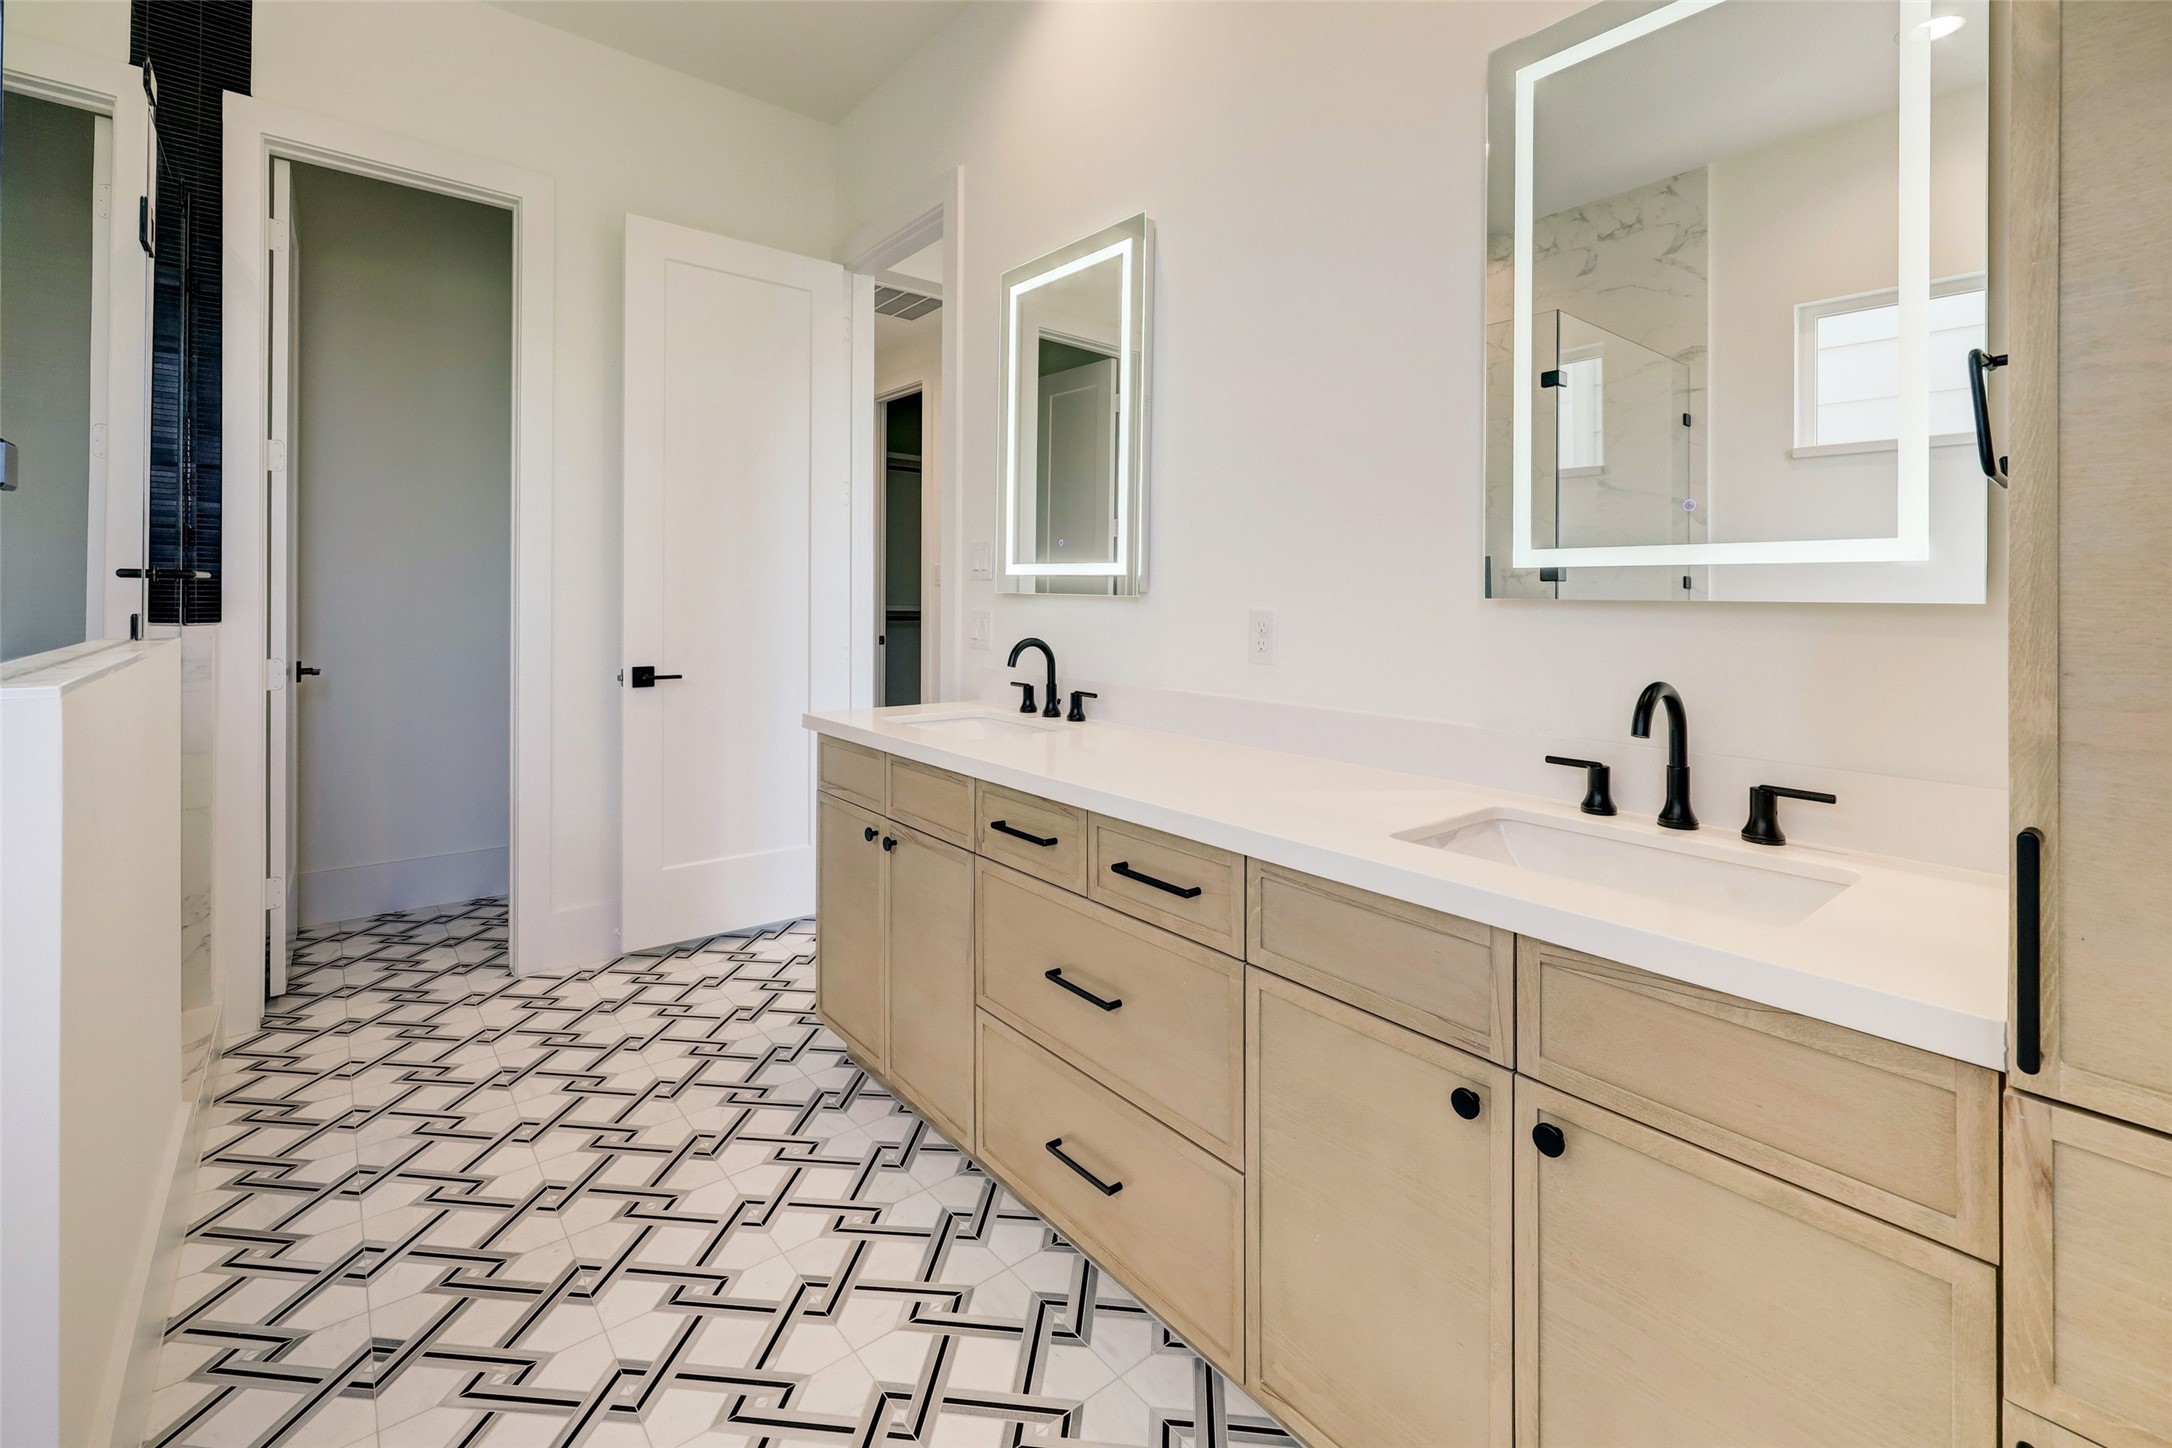 Enter into a jaw draw dropping primary bath retreat. His & her sinks, freestanding tub, oversized standalone shower lined with tile detail. Note 5307 tile will be slightly different upon completion.